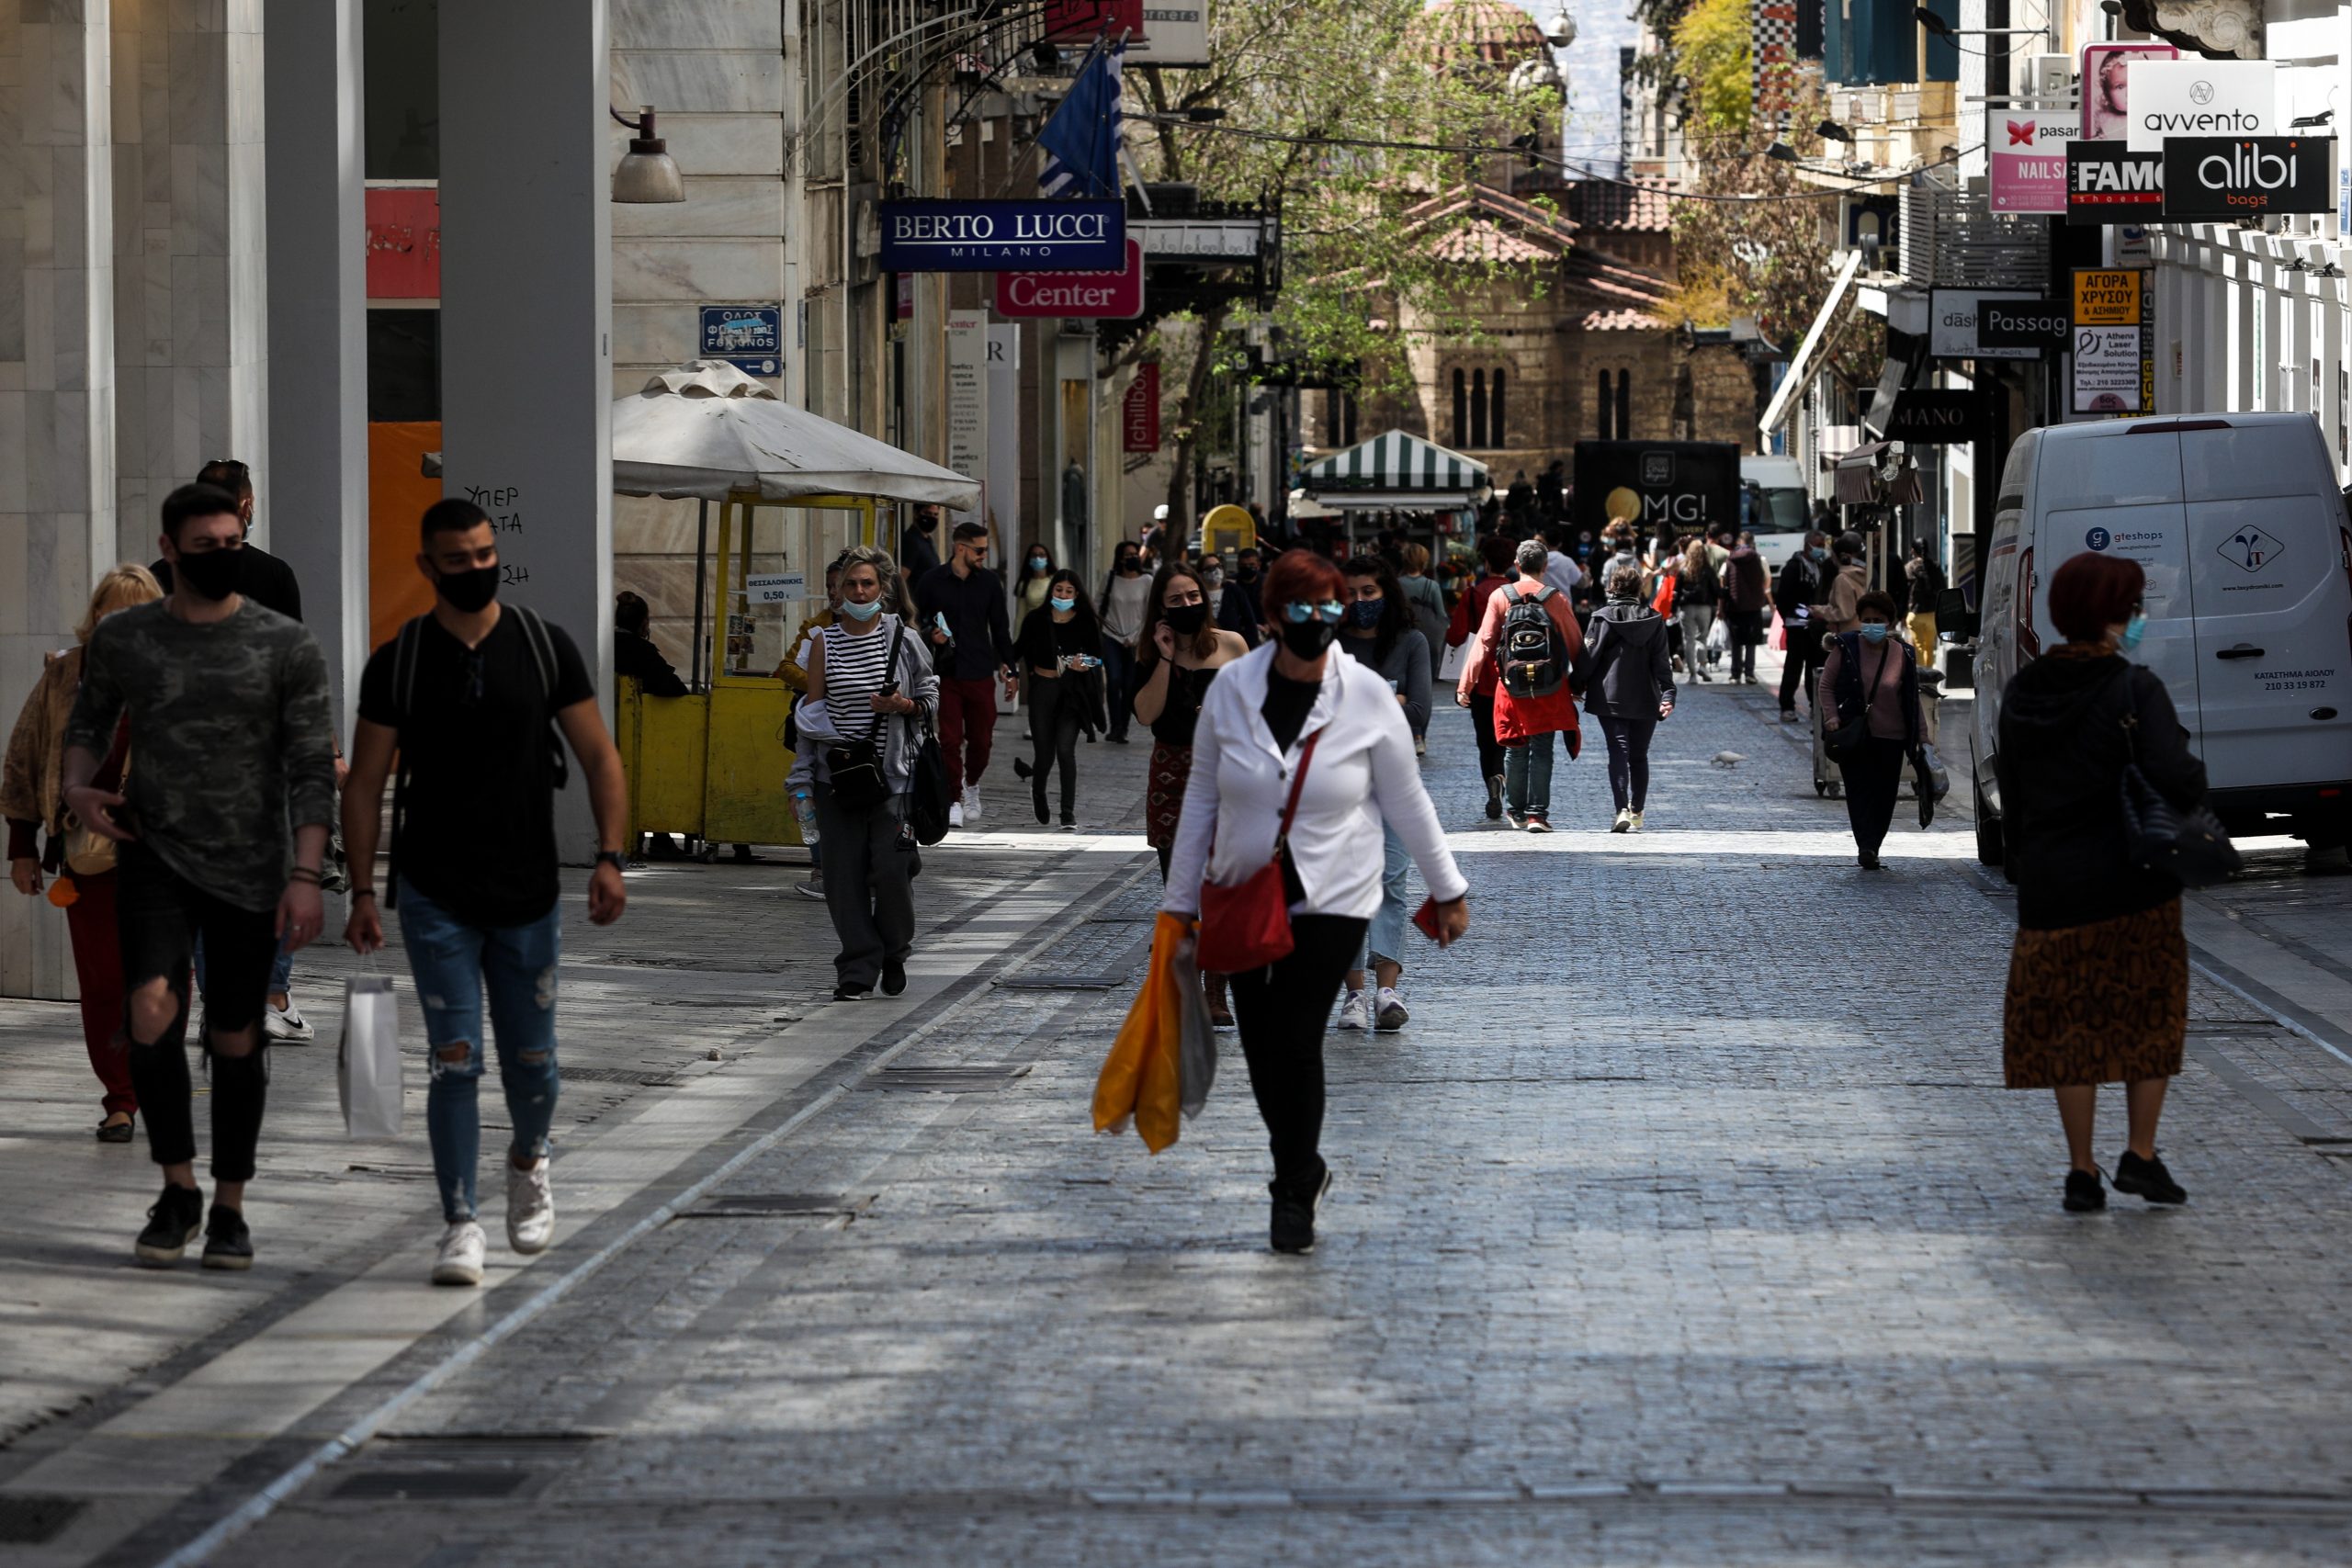 Rents in Greece: How E-commerce is changing store prices